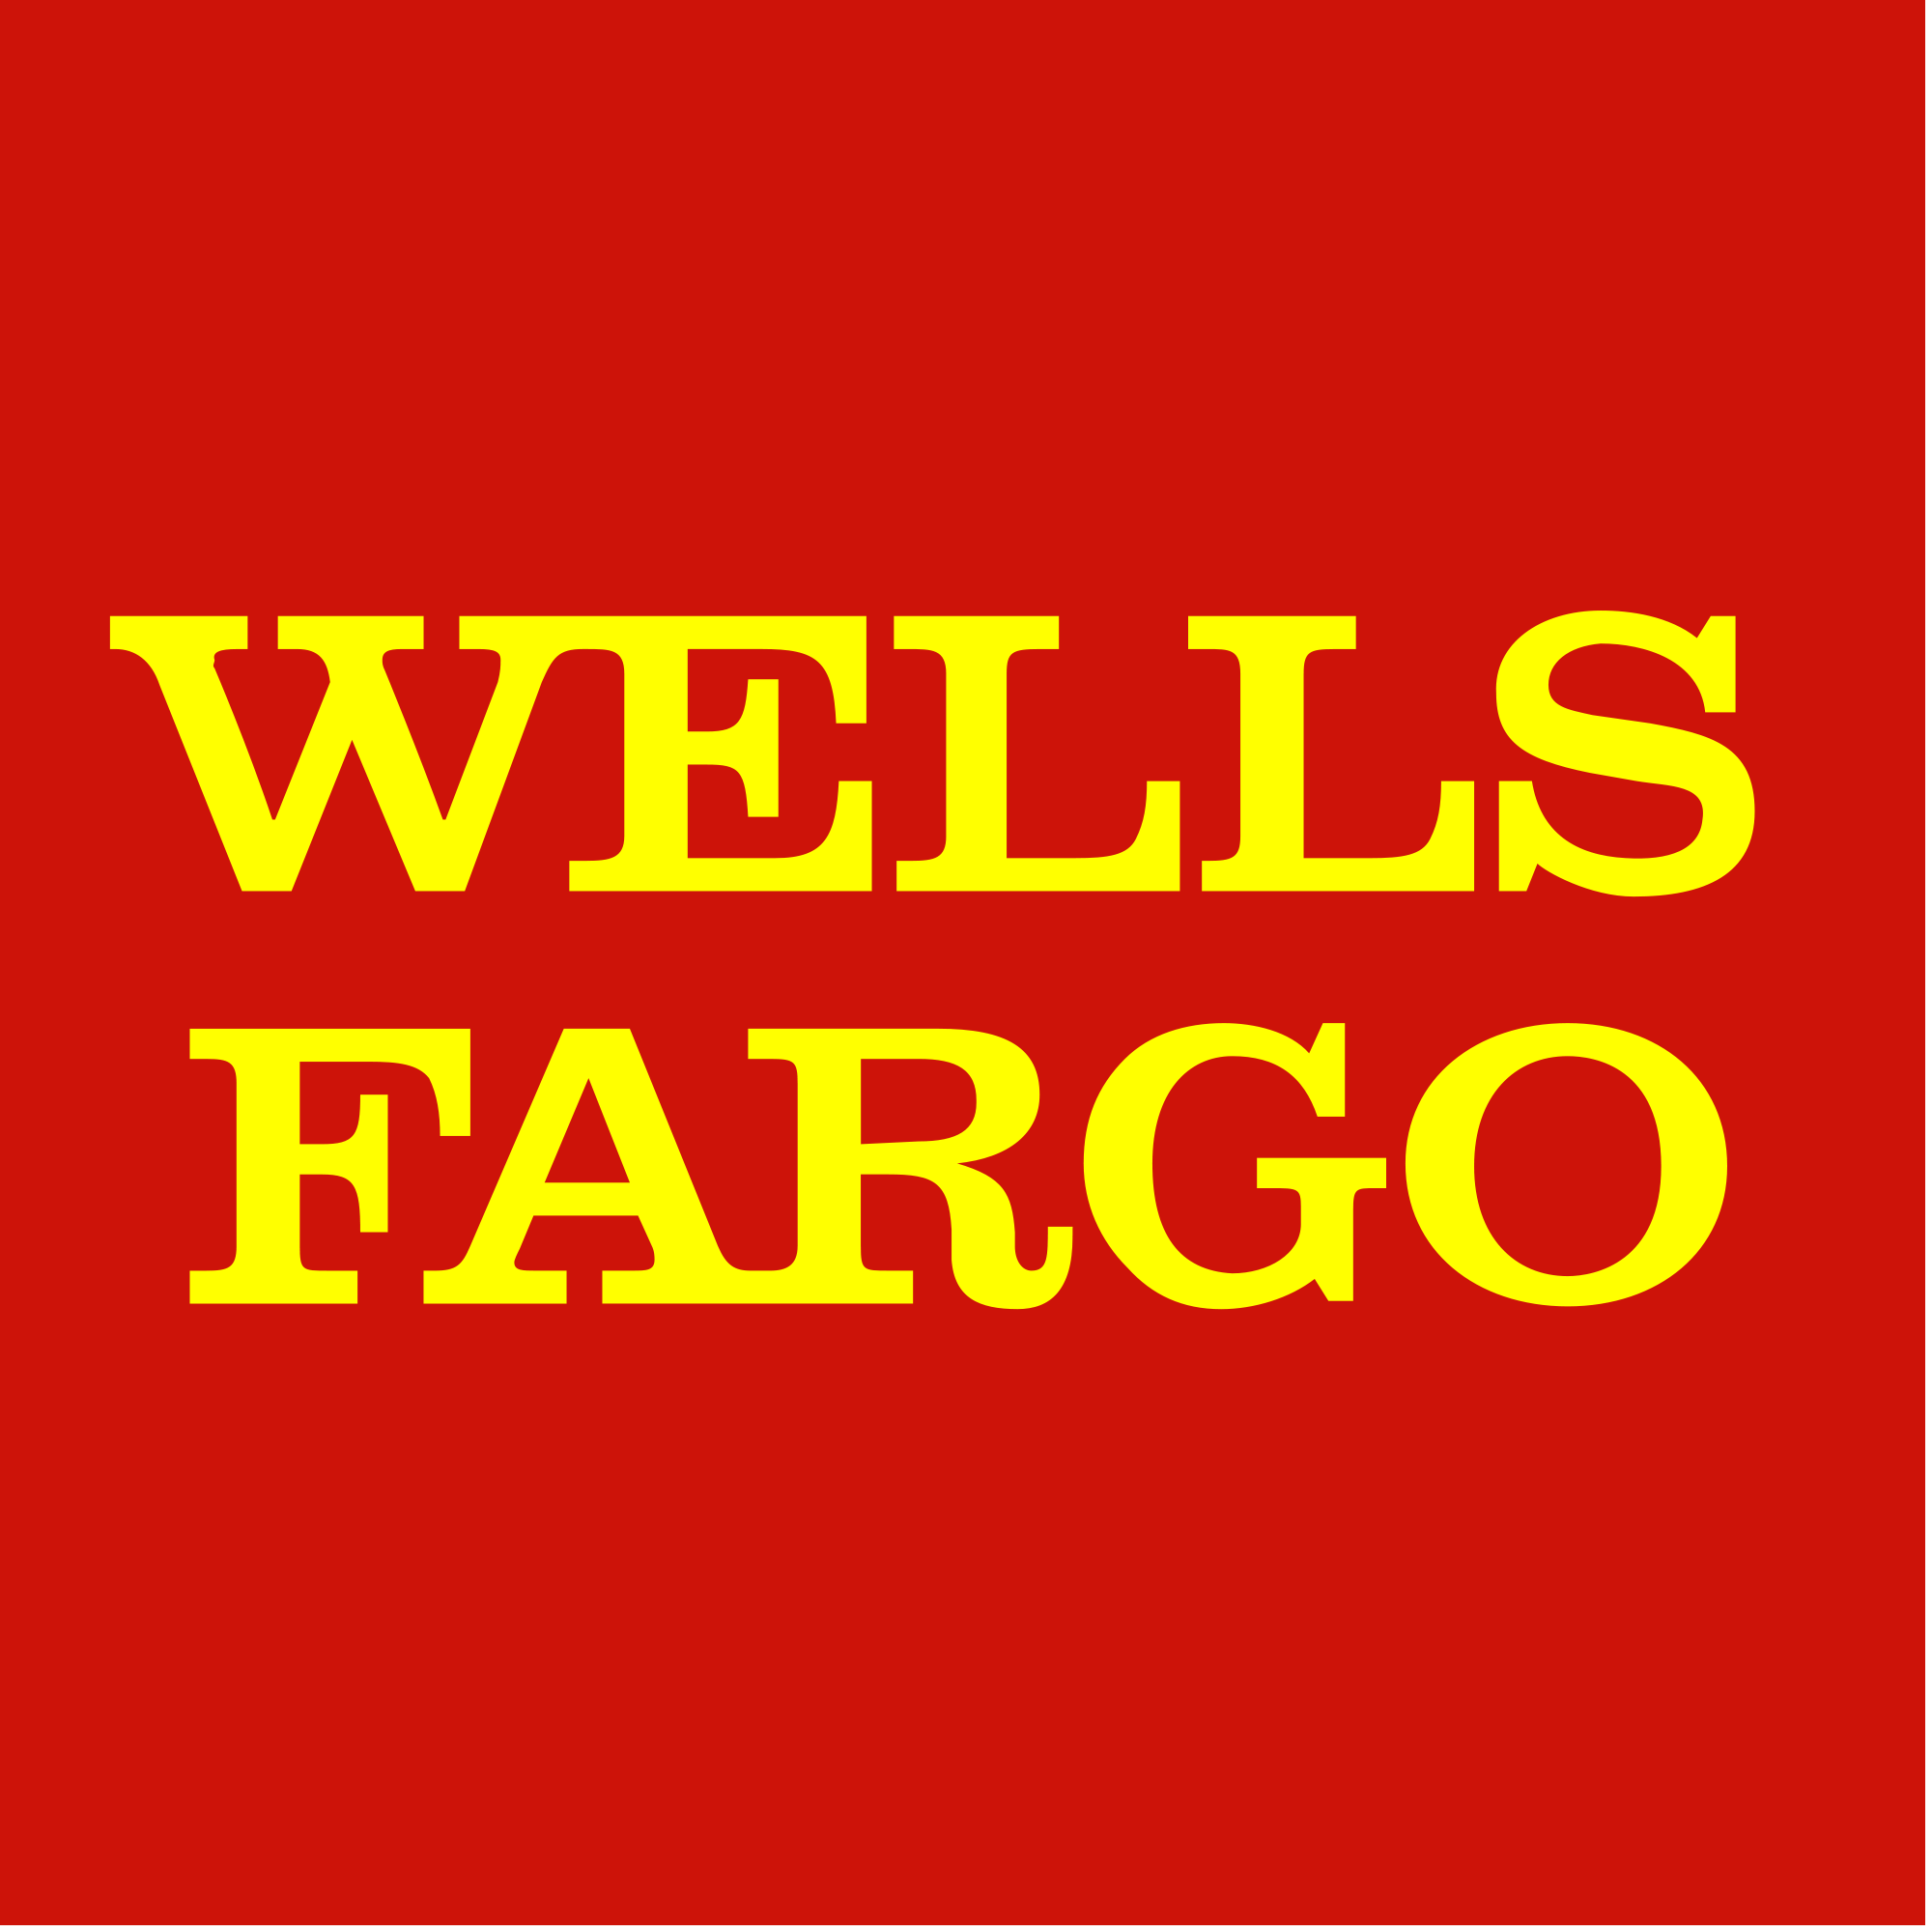 Wells Fargo employee engagement strategies to drive business results